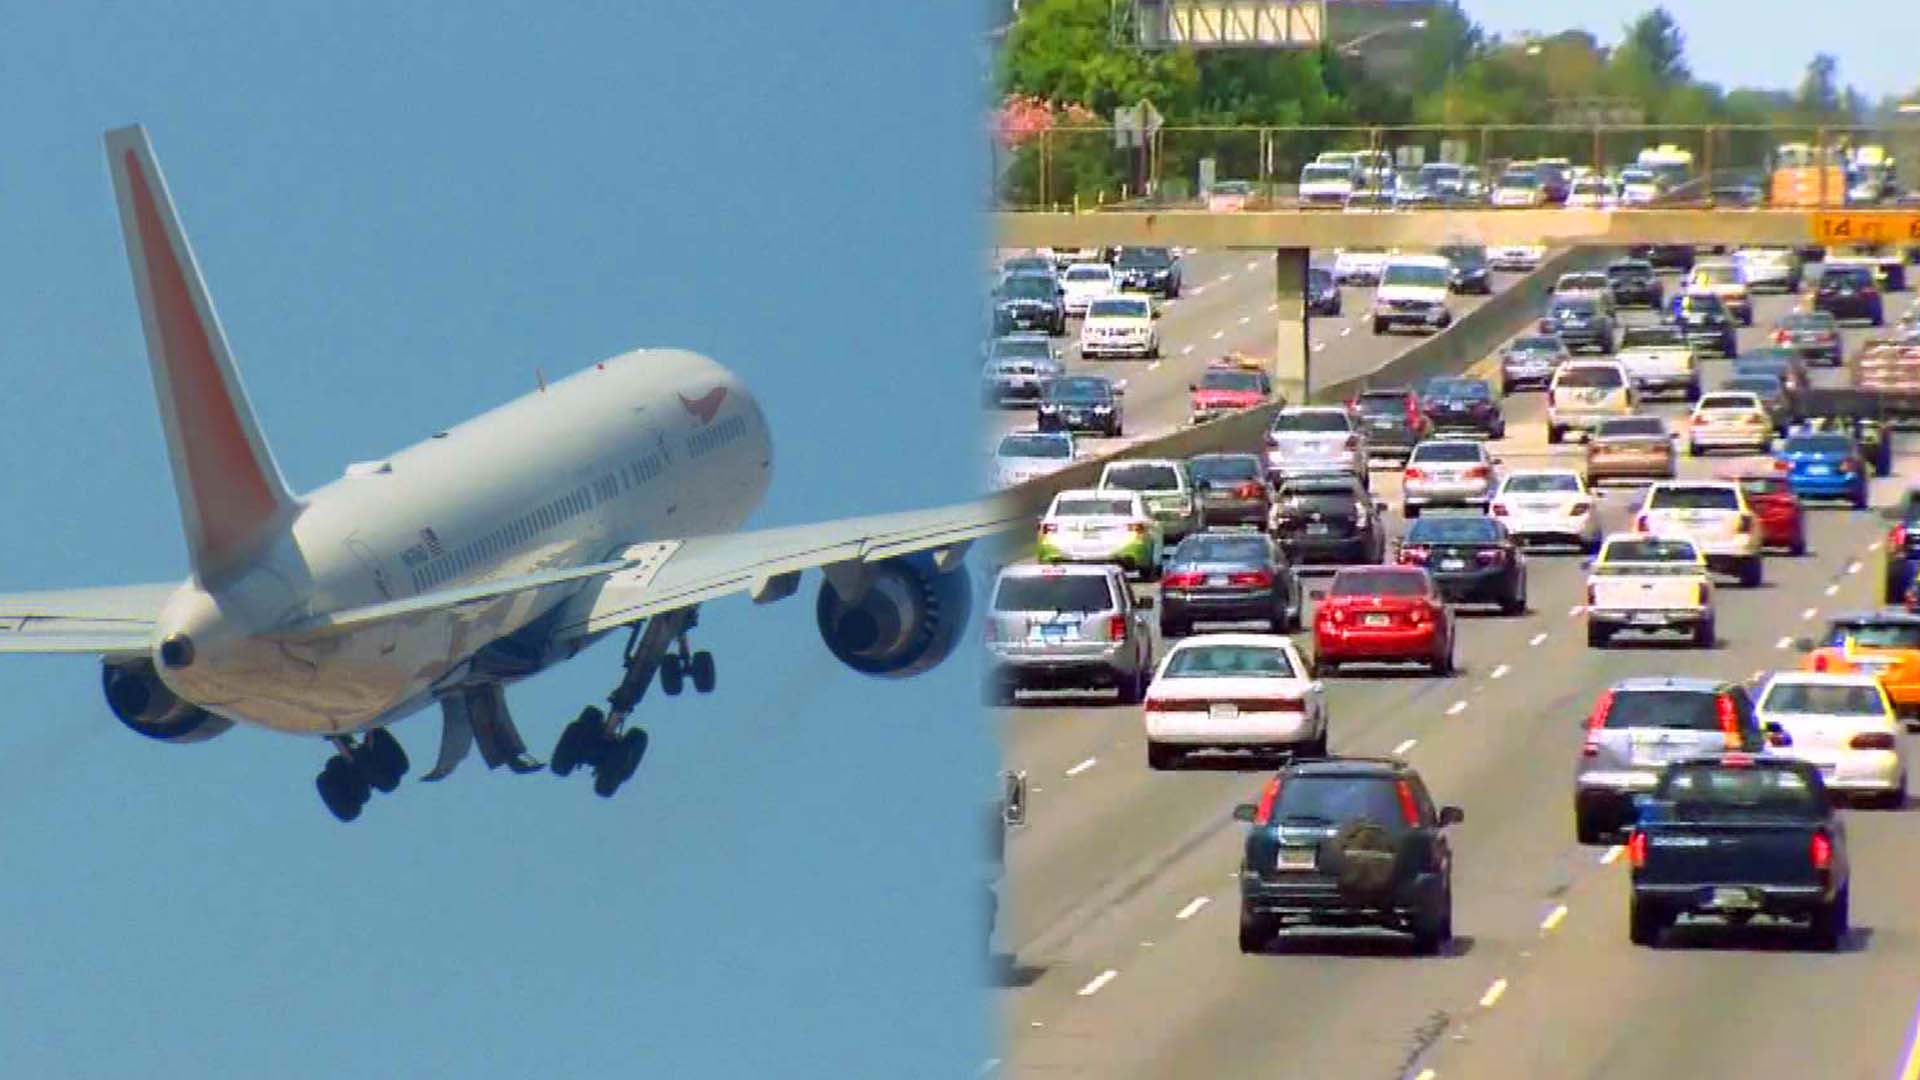 Airplane taking off / Highway with cars in traffic